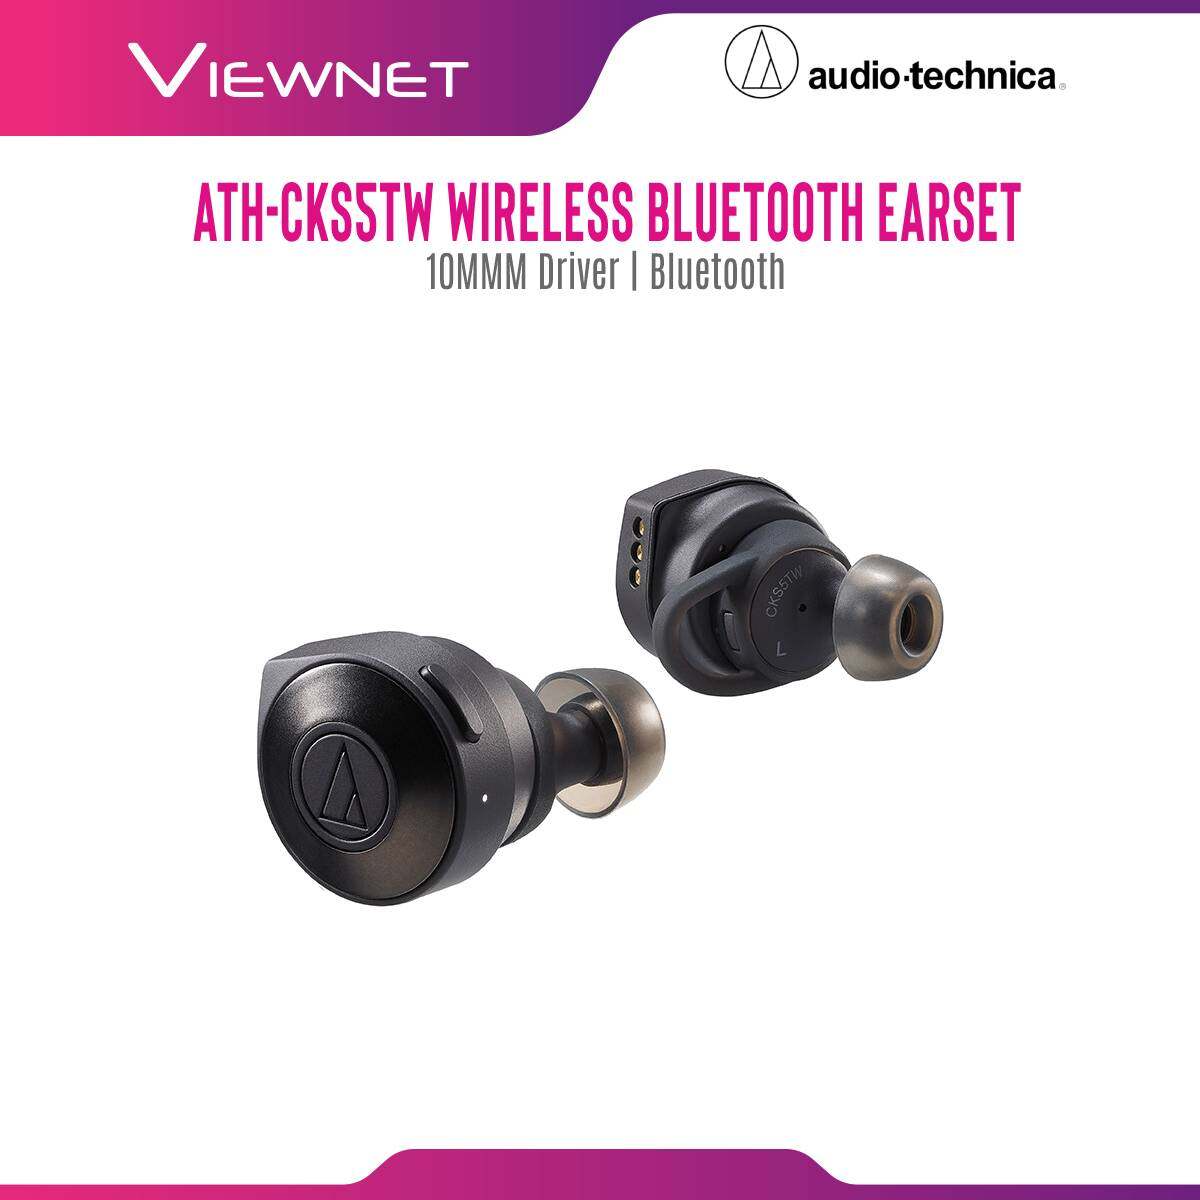 Audio-Technica Wireless Earsets ATH-CKS5TW with 10mm Driver, Bluetooth 5.0, 5 - 40,000 Hz Frequency, 45 Hours Battery Life with Charging Case